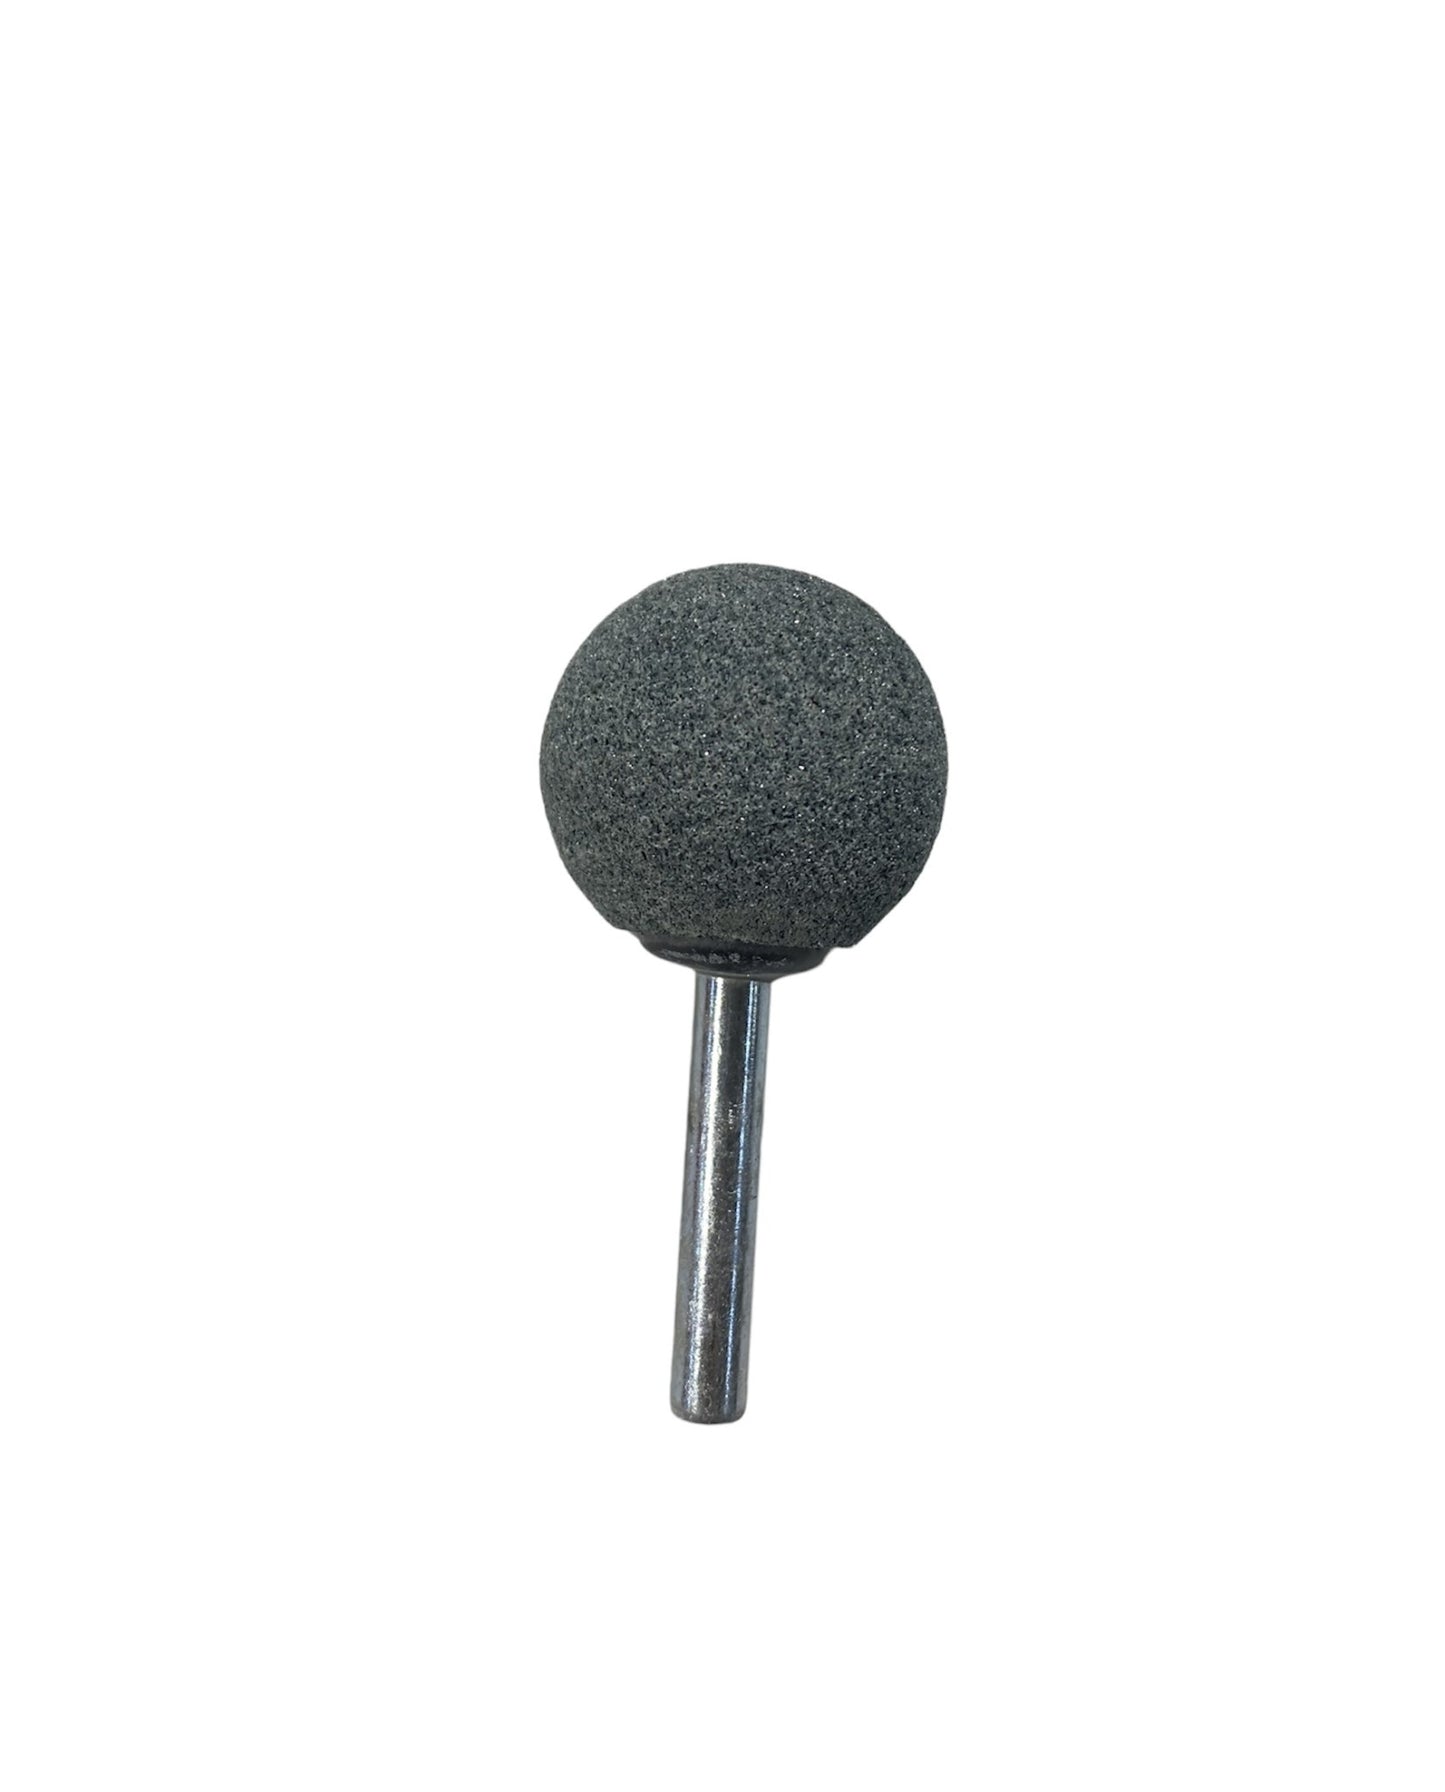 Silicon Carbide Mounted Stone #25 Large 60g (1/4'' Shank)